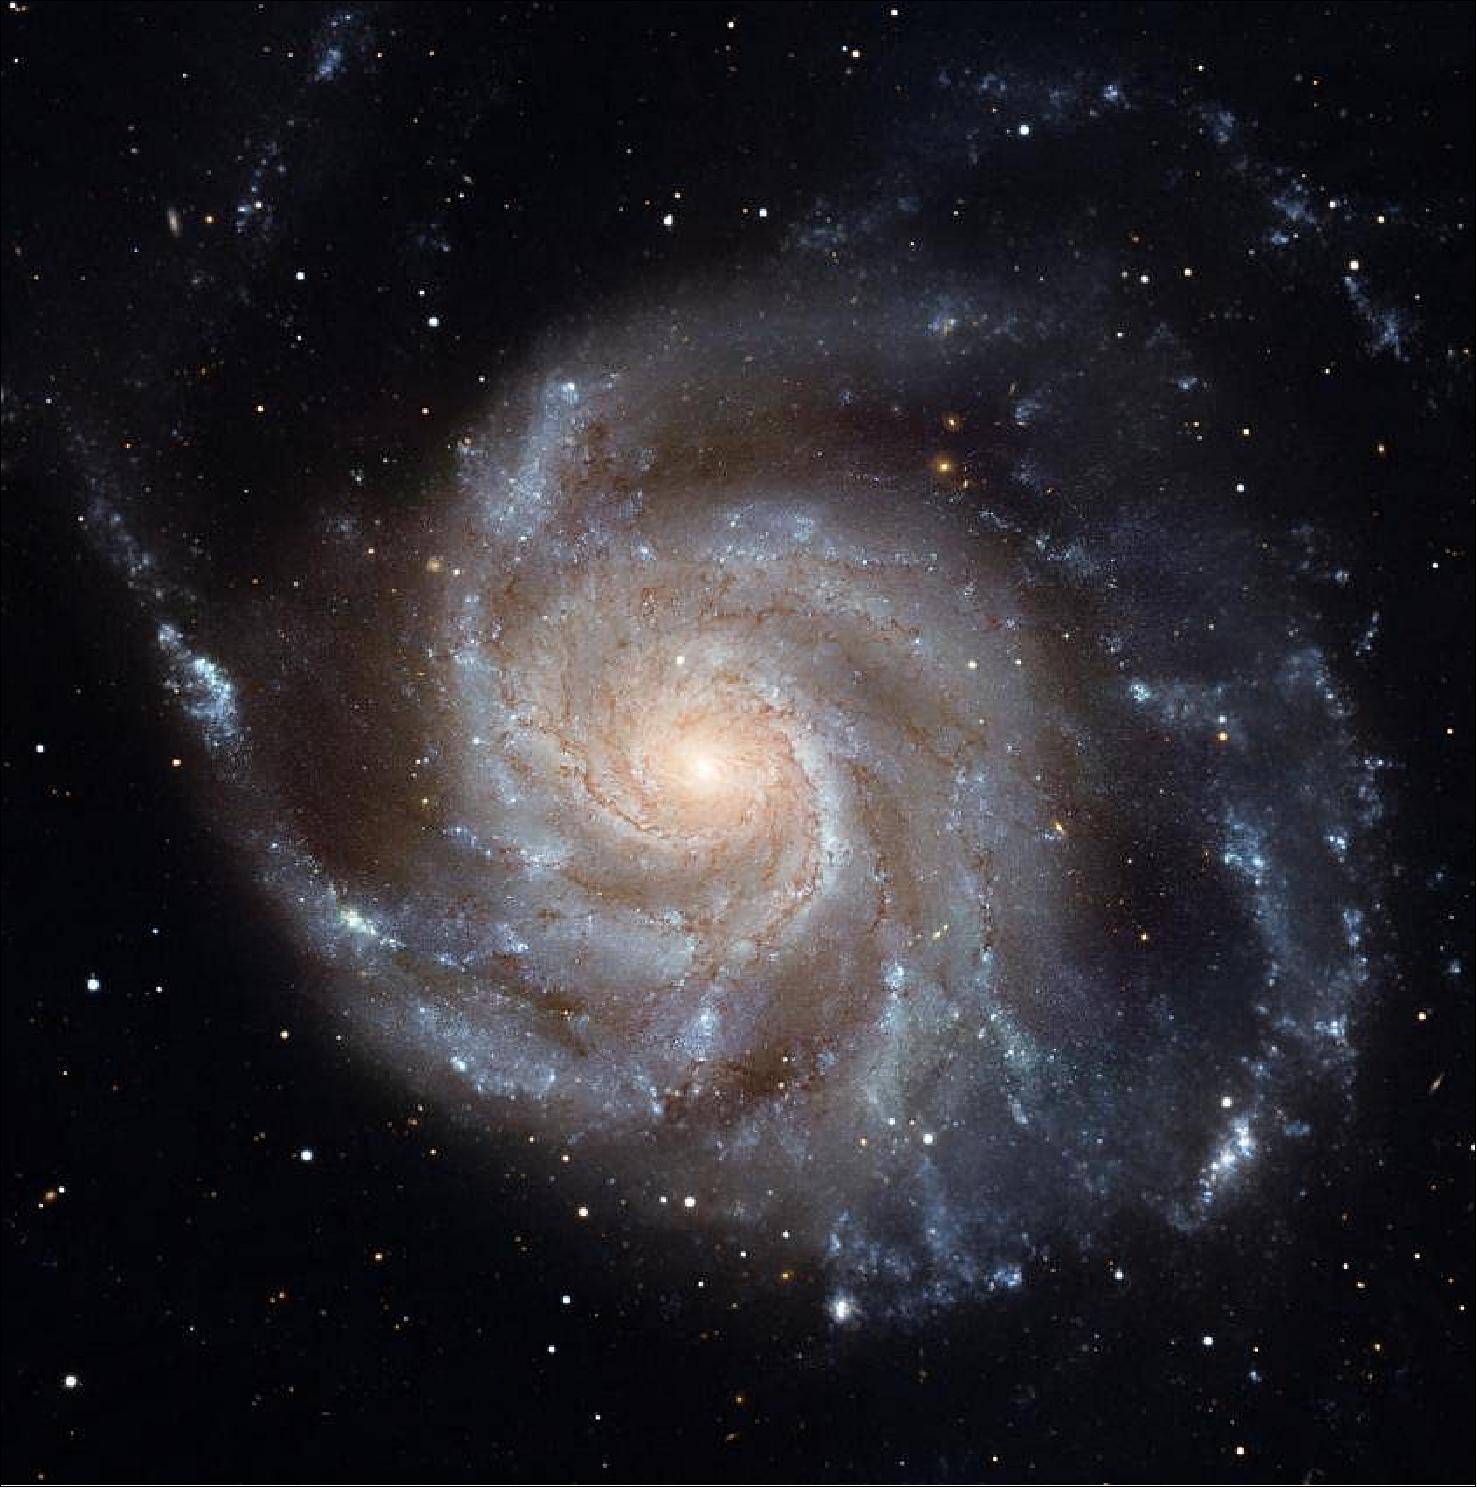 Figure 27: An image of Messier 101, the Pinwheel Galaxy, made with the Hubble Space Telescope. The bright blue clumps in the spiral arms are sites of recent star formation [image credit: NASA, ESA, K. Kuntz (JHU), F. Bresolin (University of Hawaii), J. Trauger (Jet Propulsion Lab), J. Mould (NOAO), Y.-H. Chu (University of Illinois, Urbana), and STScI, Licence type Attribution (CC BY 4.0)]